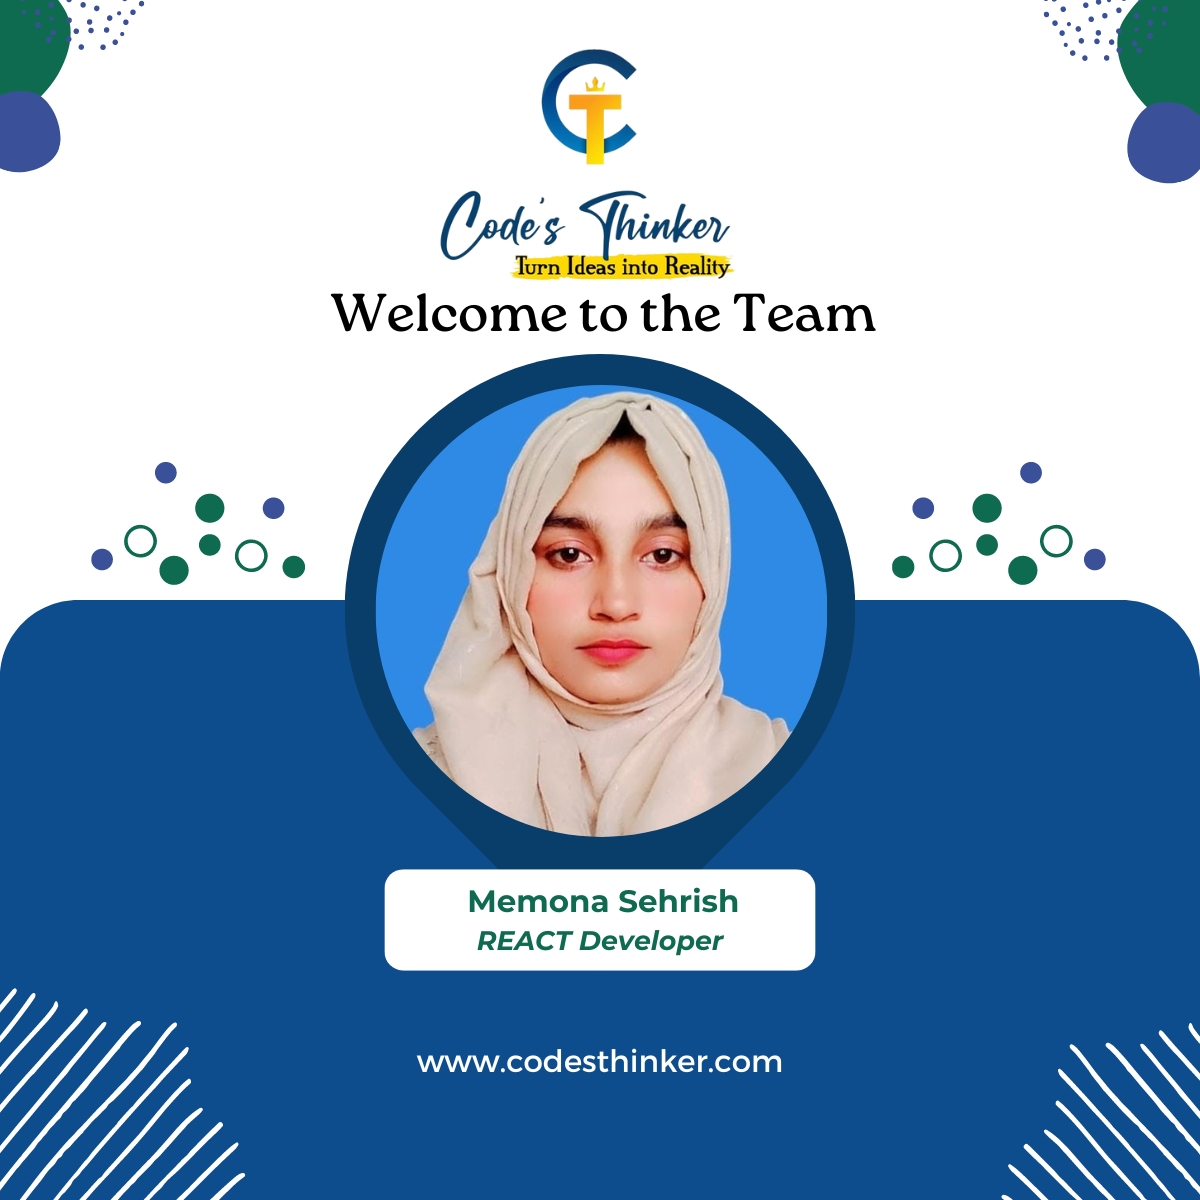 Thrilled to welcome our newest addition to the team! With deep expertise in React, we're poised for breakthroughs and exceptional user experiences. Excited to build remarkable projects together!
#ReactDeveloper
#WelcomeAboard
#InnovationJourney
#NewTeamMember
#CodesThinker